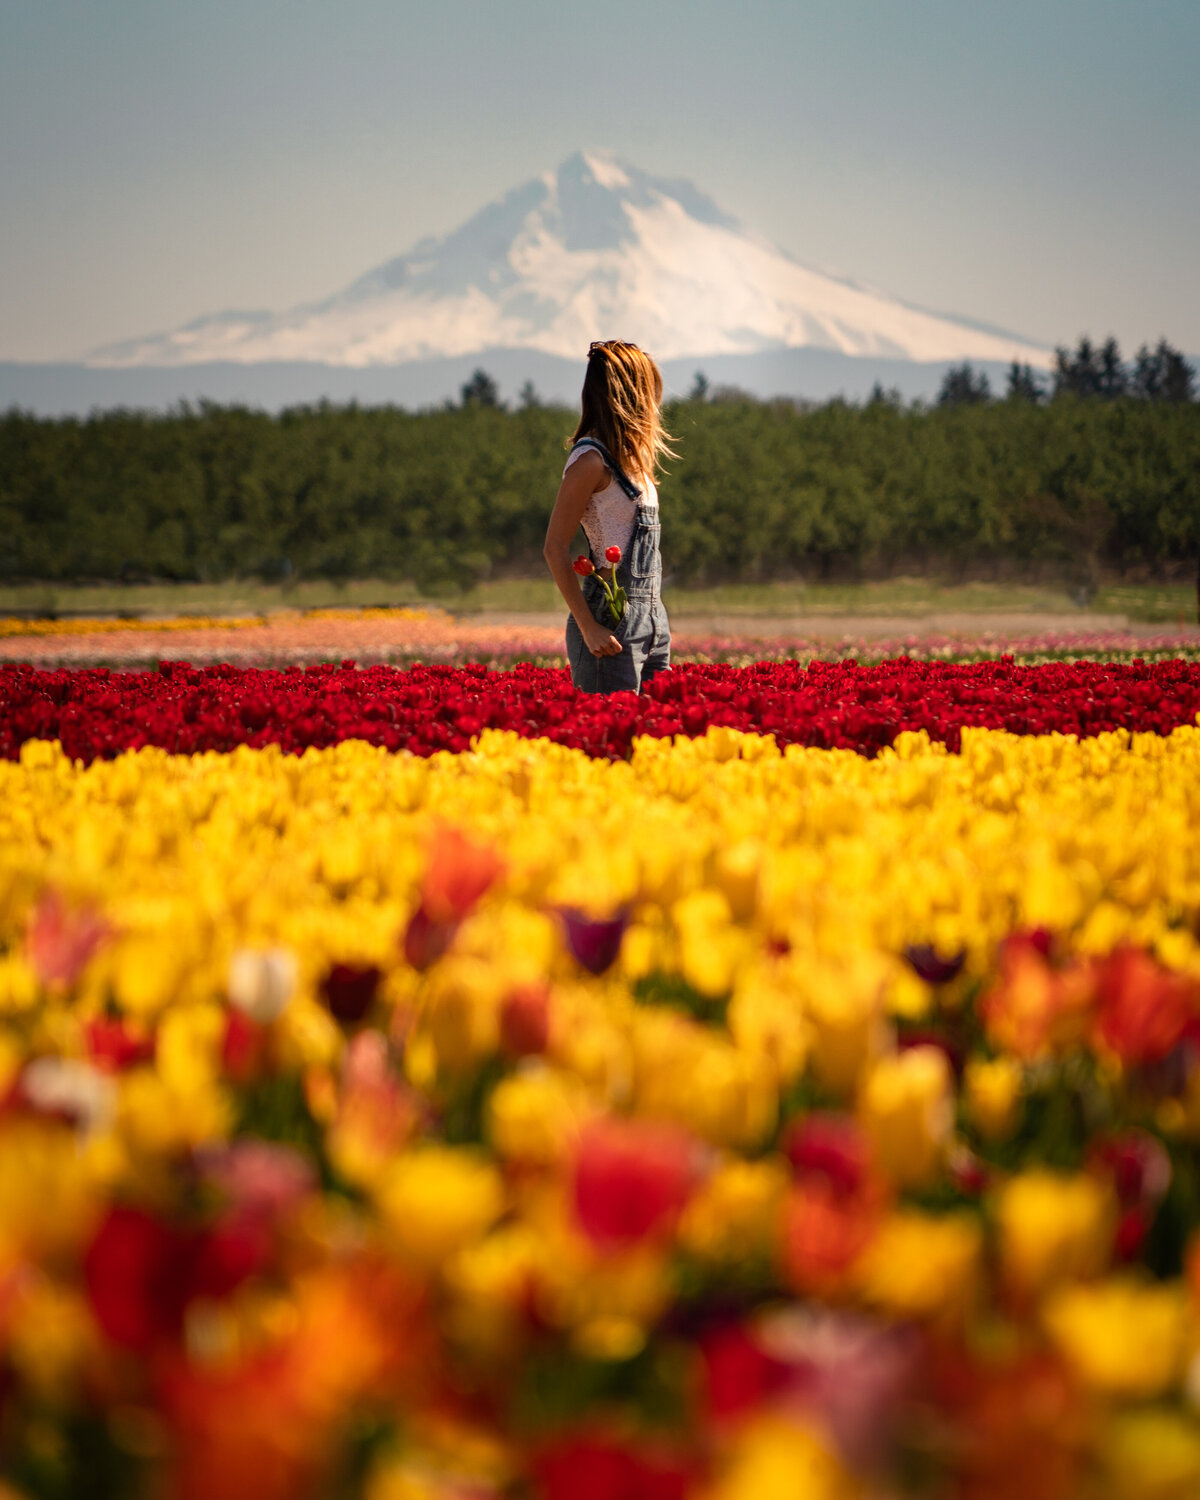 Woman in short overalls on front of red and yellow tulip field looking at Mount Rainier